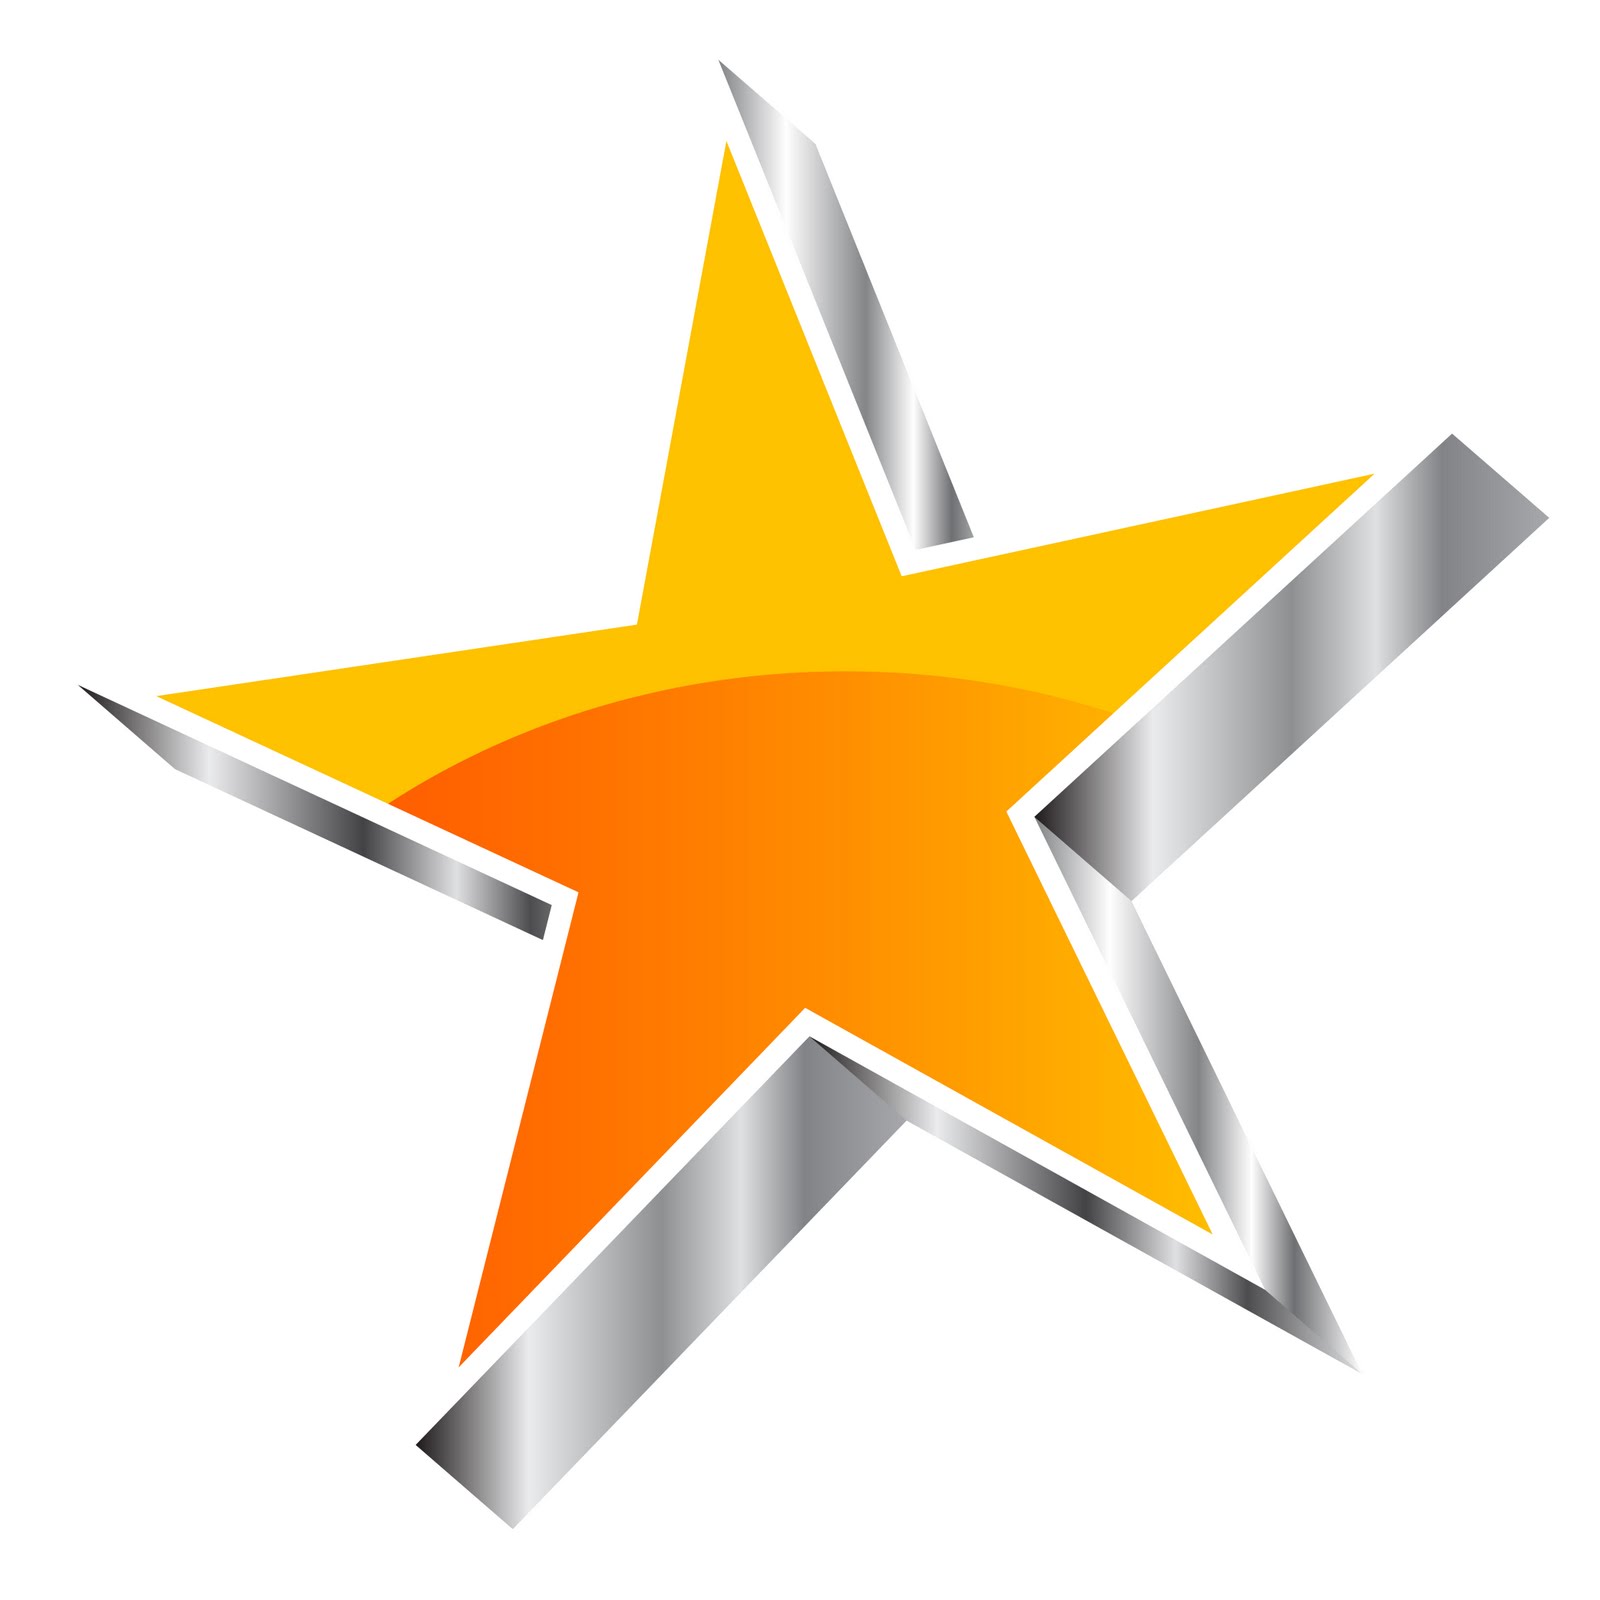 Star Vector Images - ClipArt Best